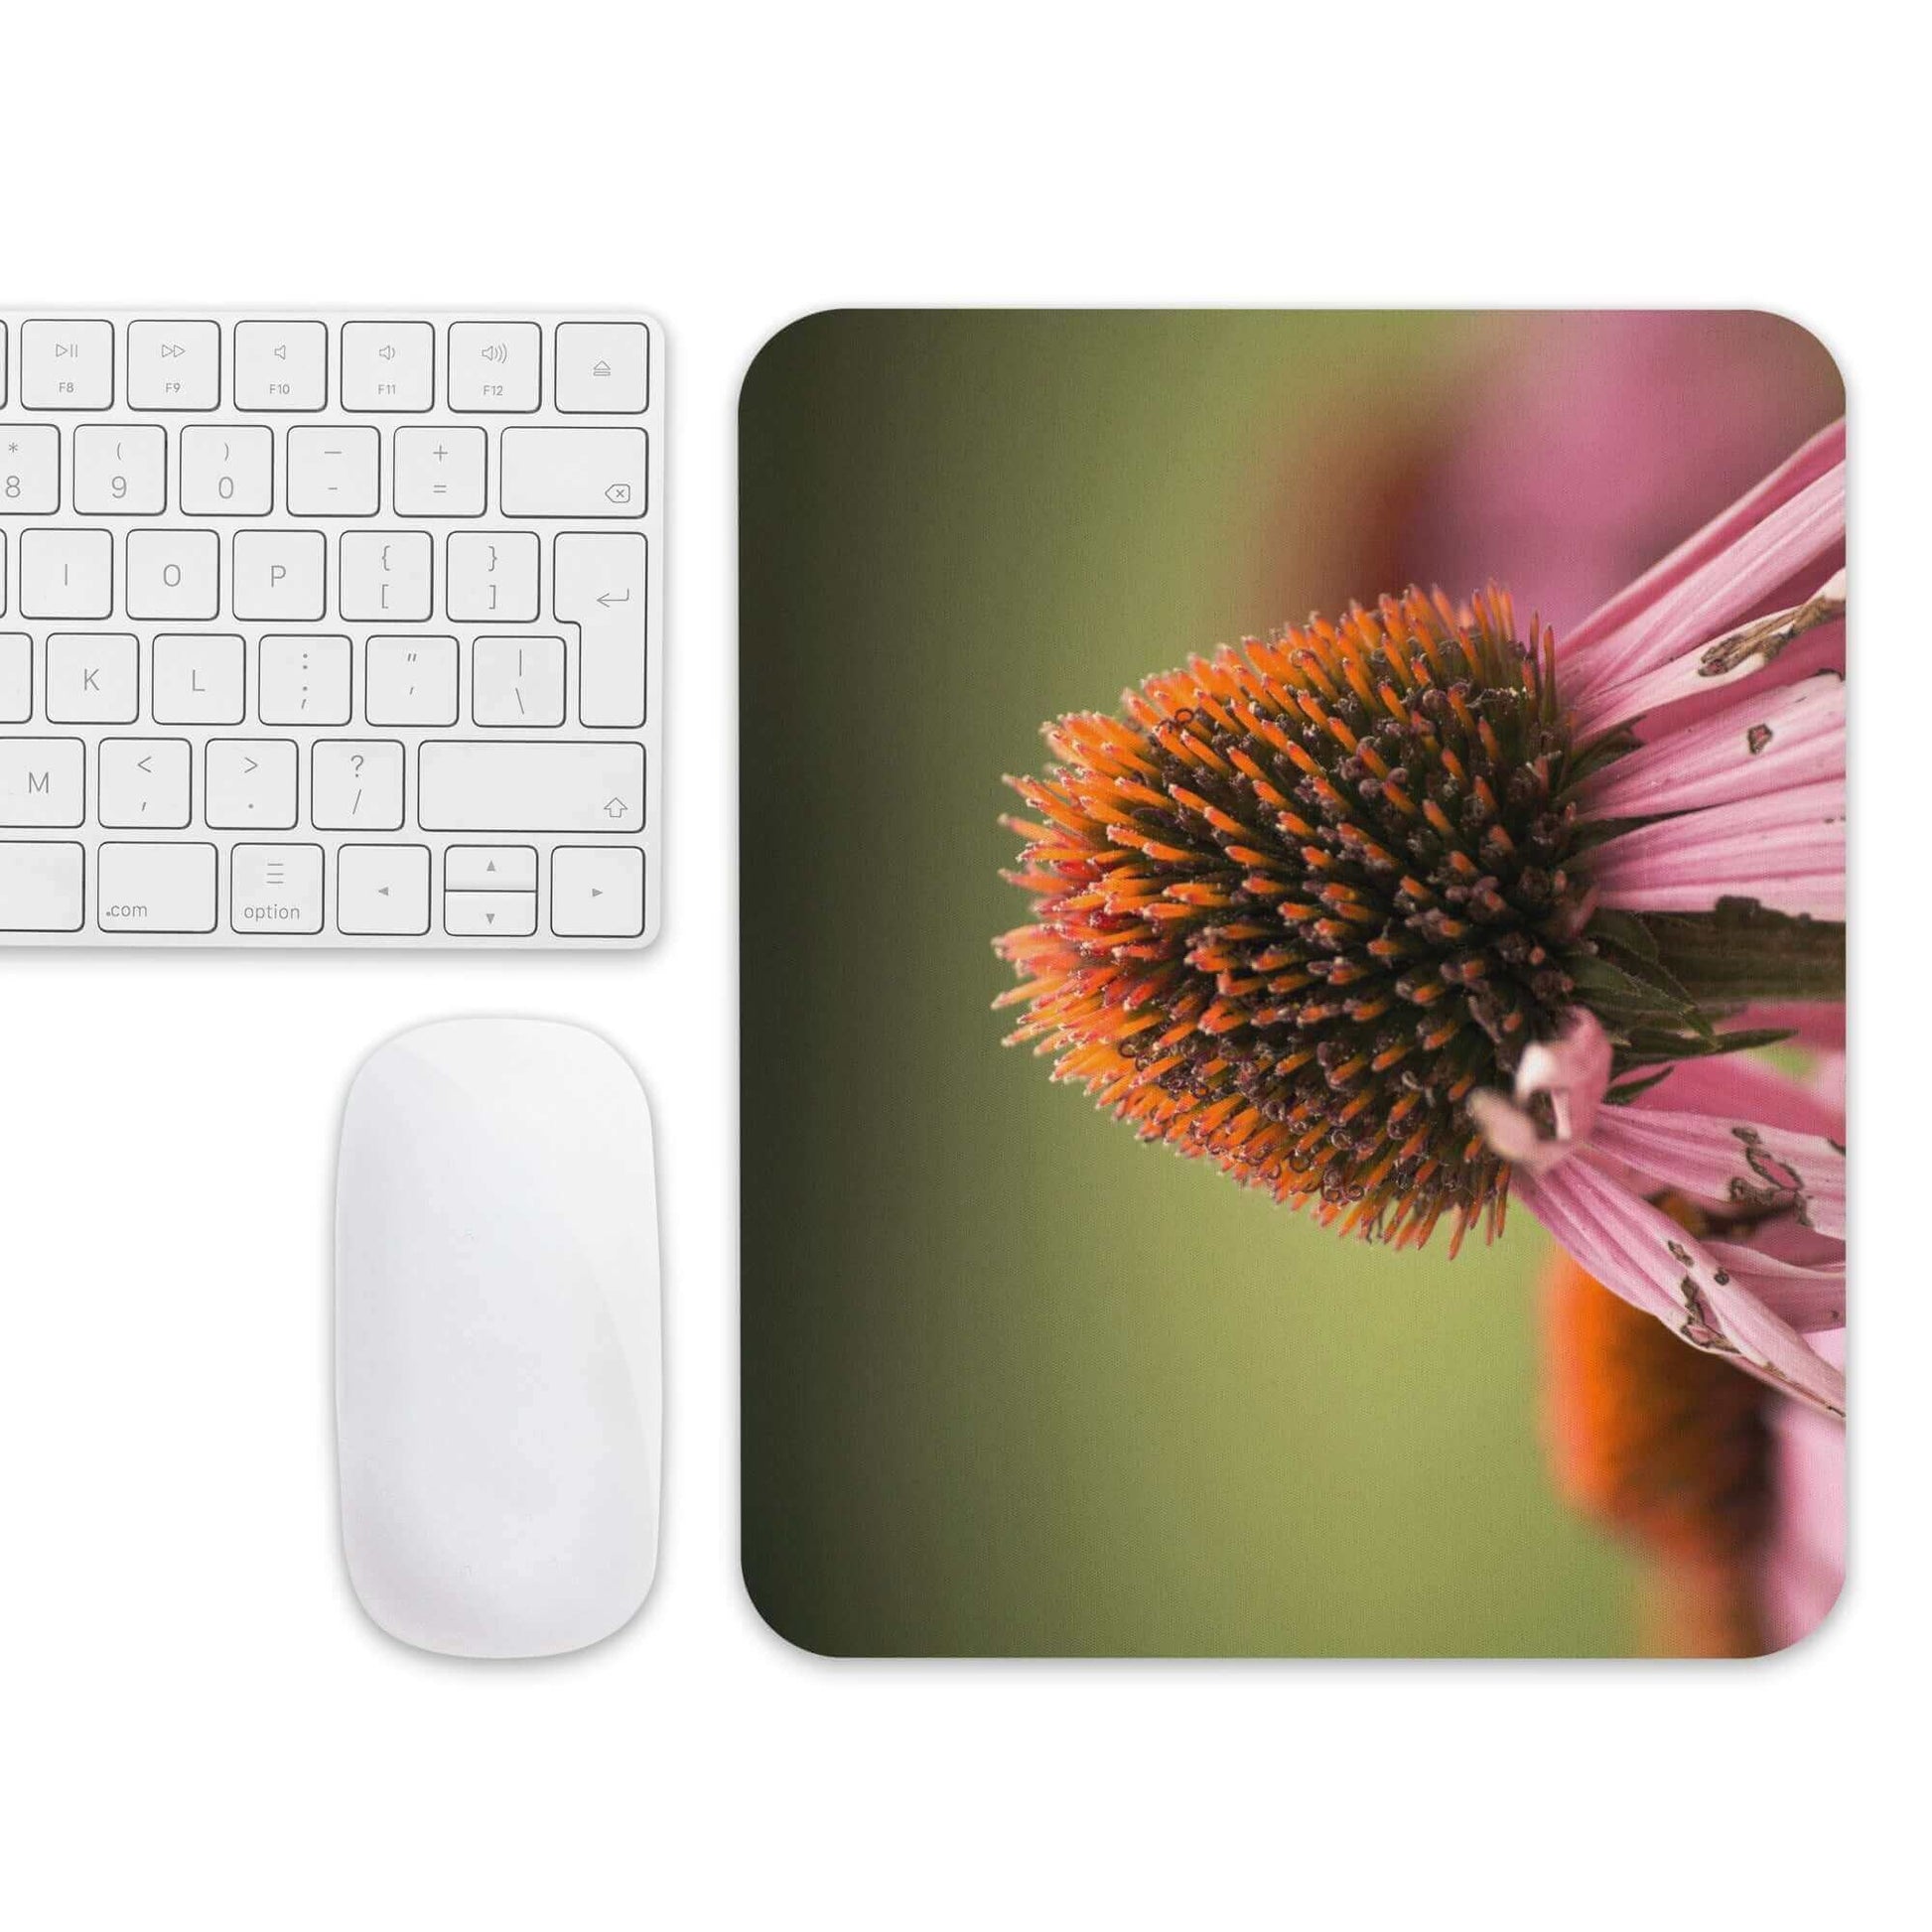 Cone flower up close - Mouse pad - Horrible Designs